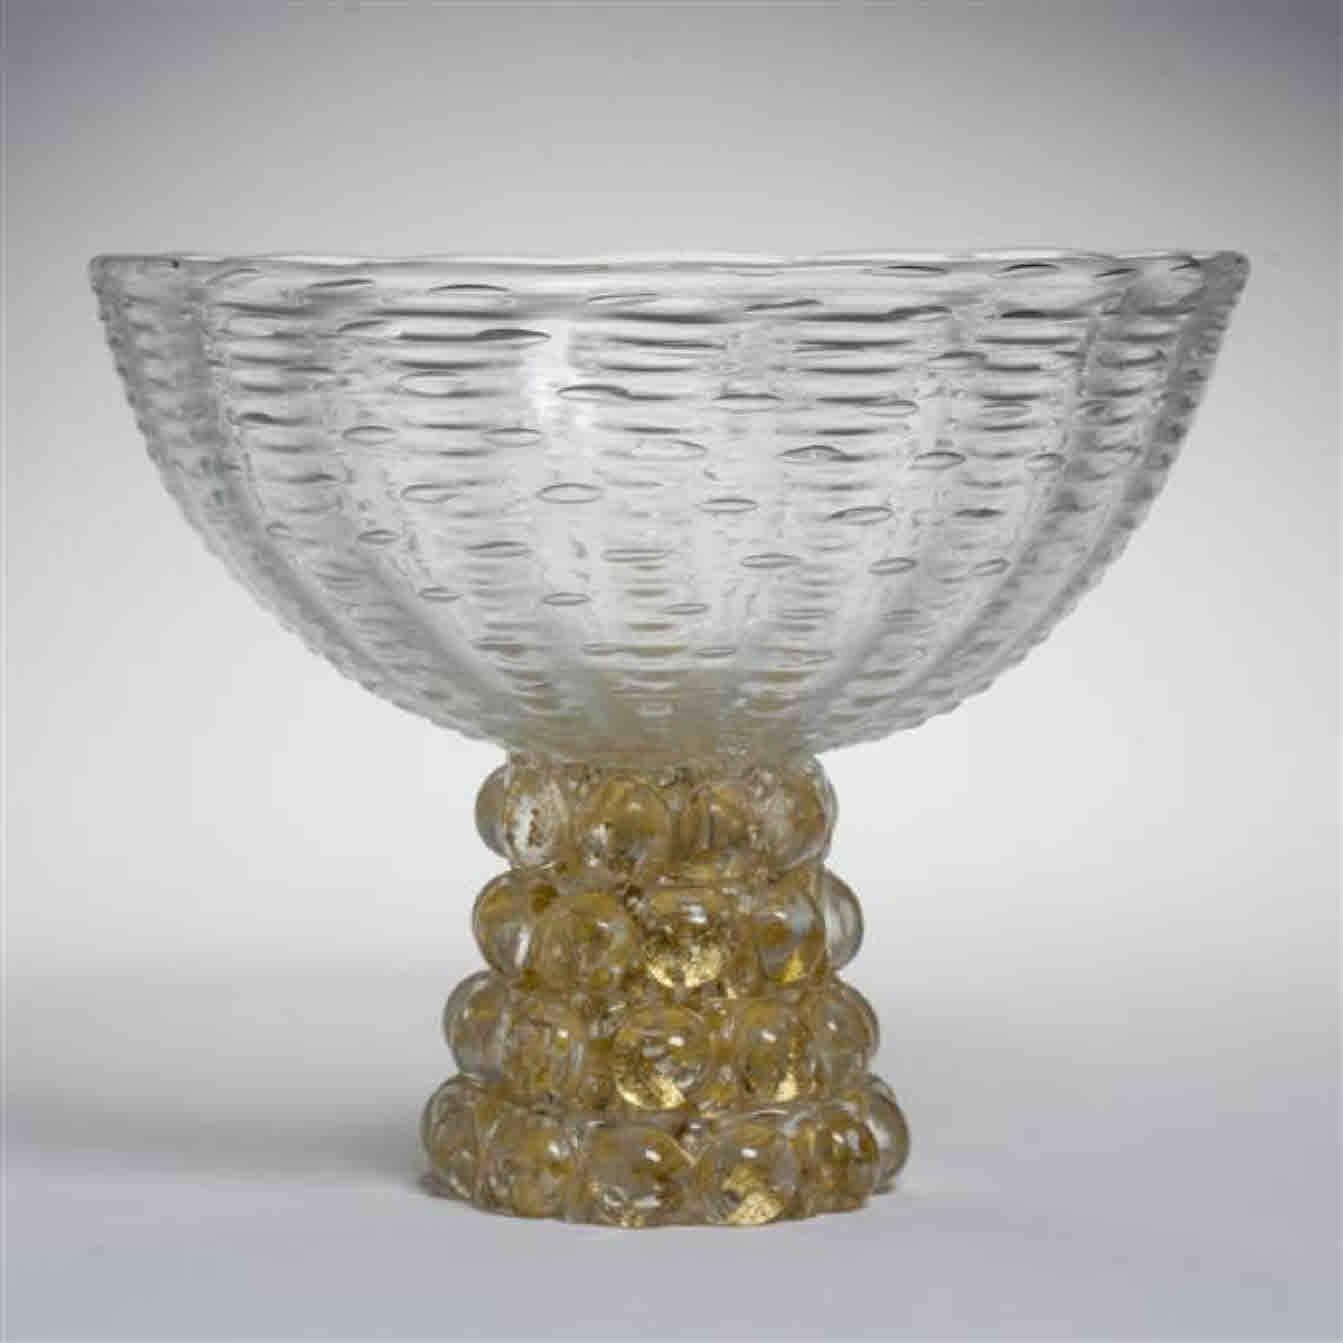 Rare pair of Barovier and Toso Murano pedestal bowls with Lenti bases, circa 1930s.